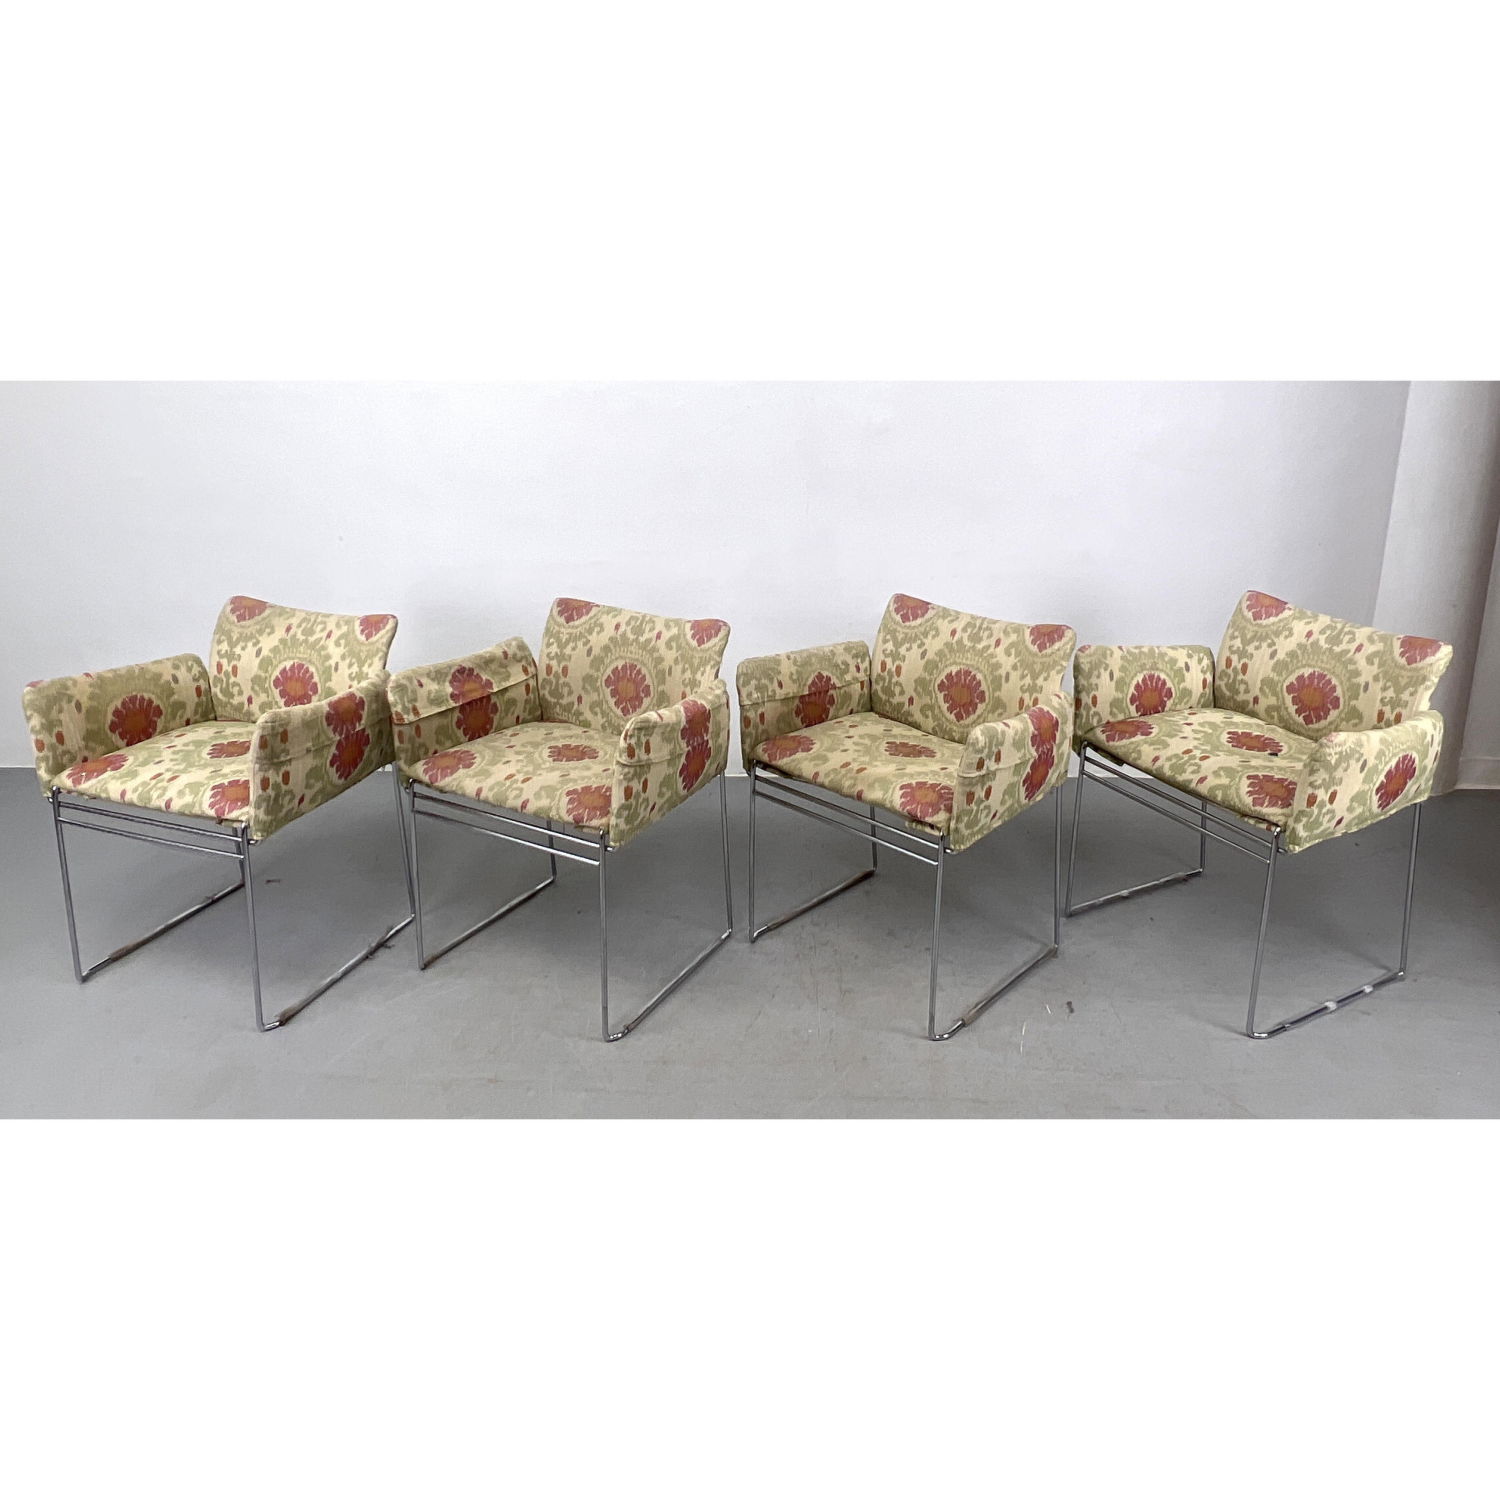 Set 4 B BERGER Dining Chairs. Upholstered